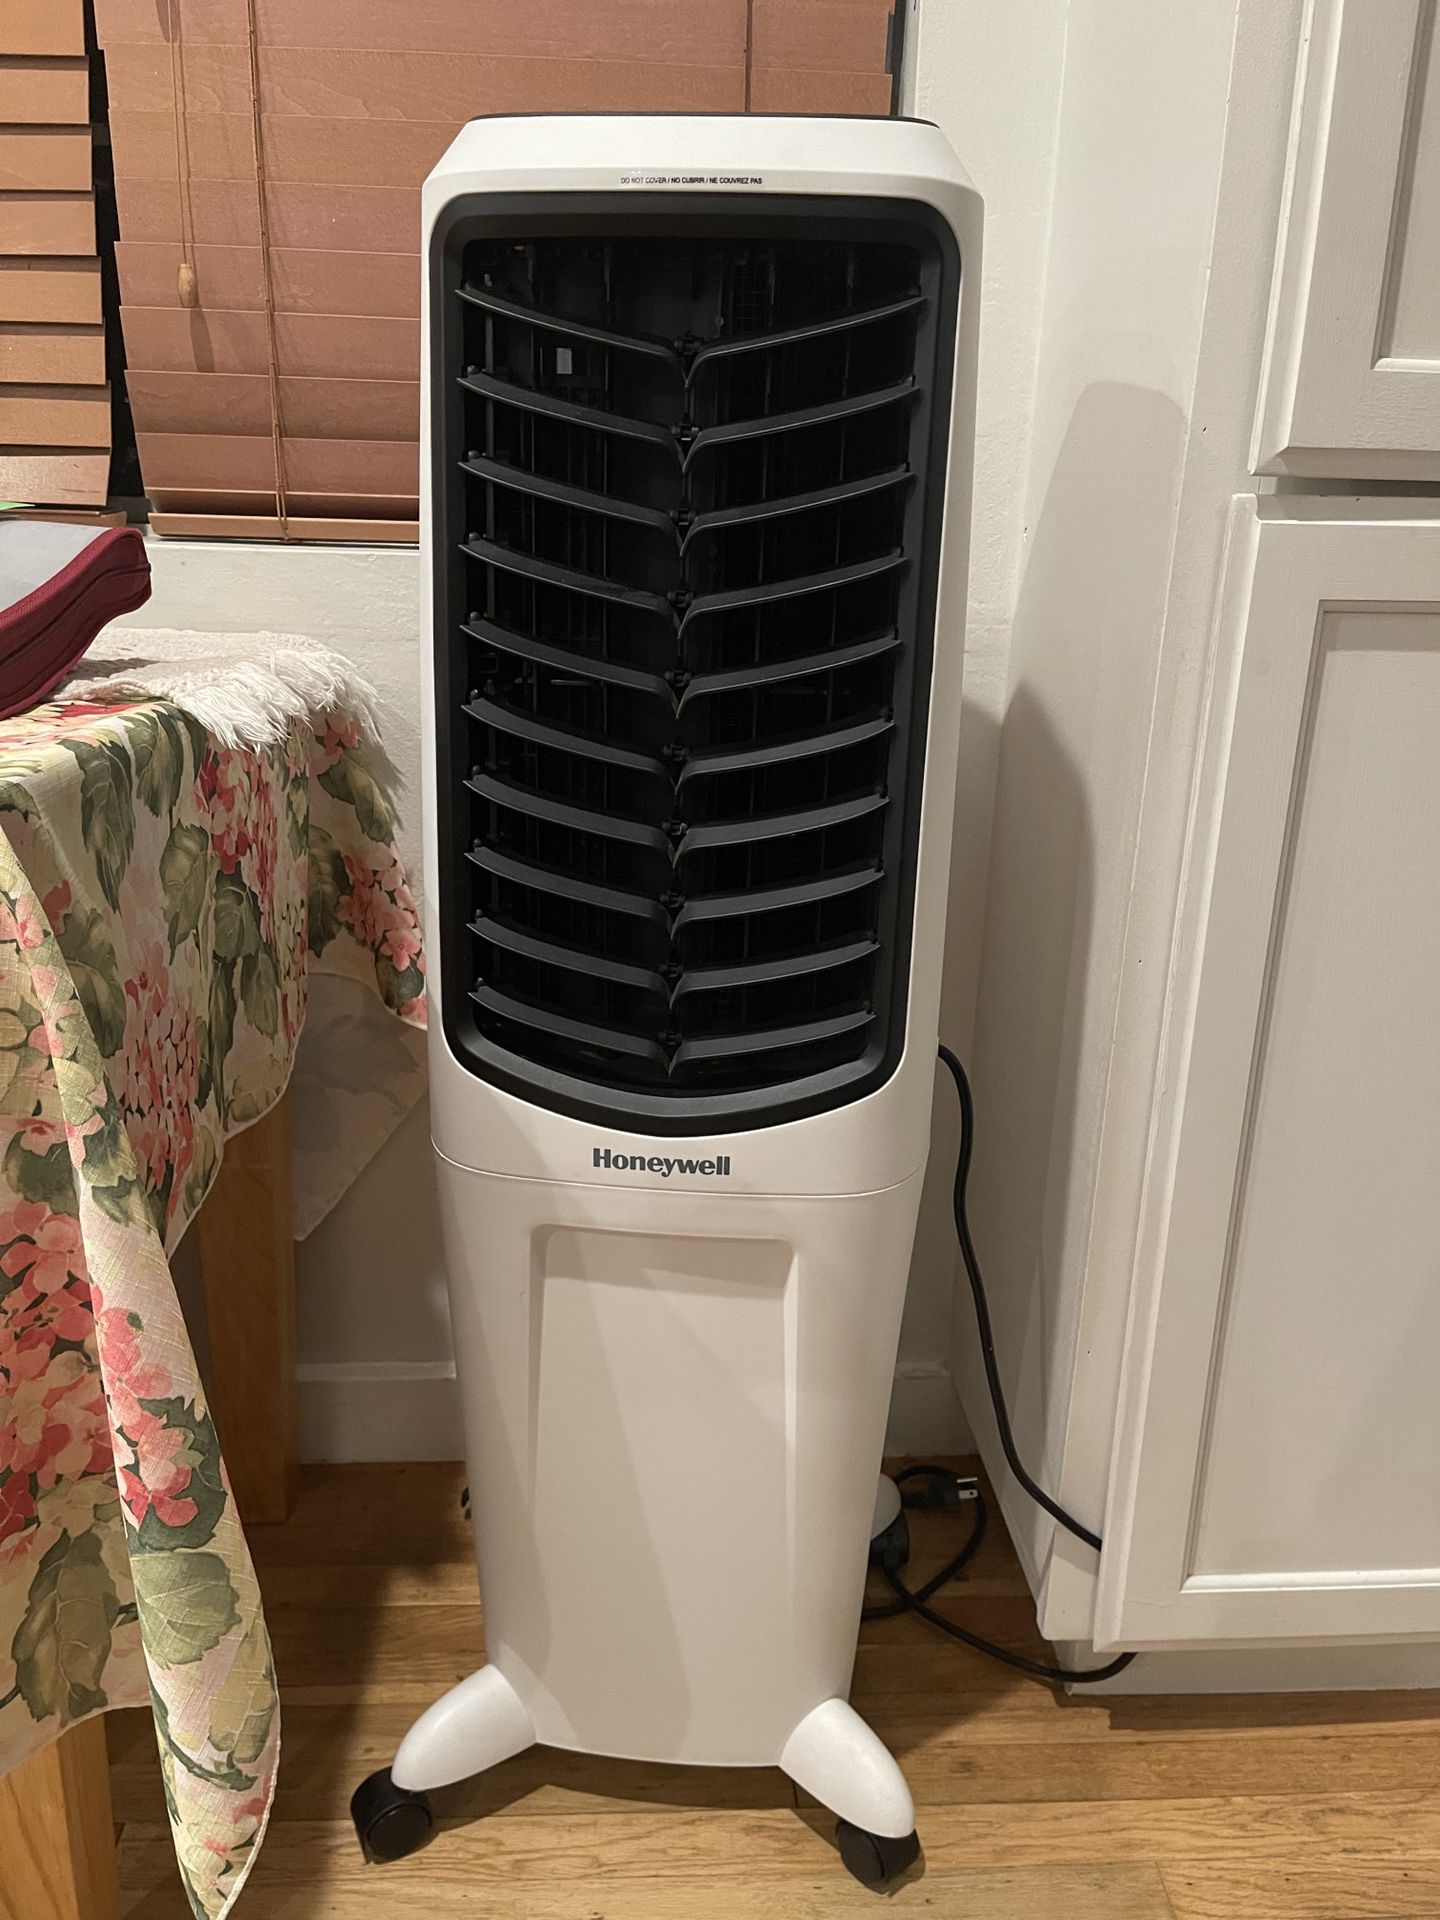 Honeywell Portable Air Conditioner On Wheels With Control